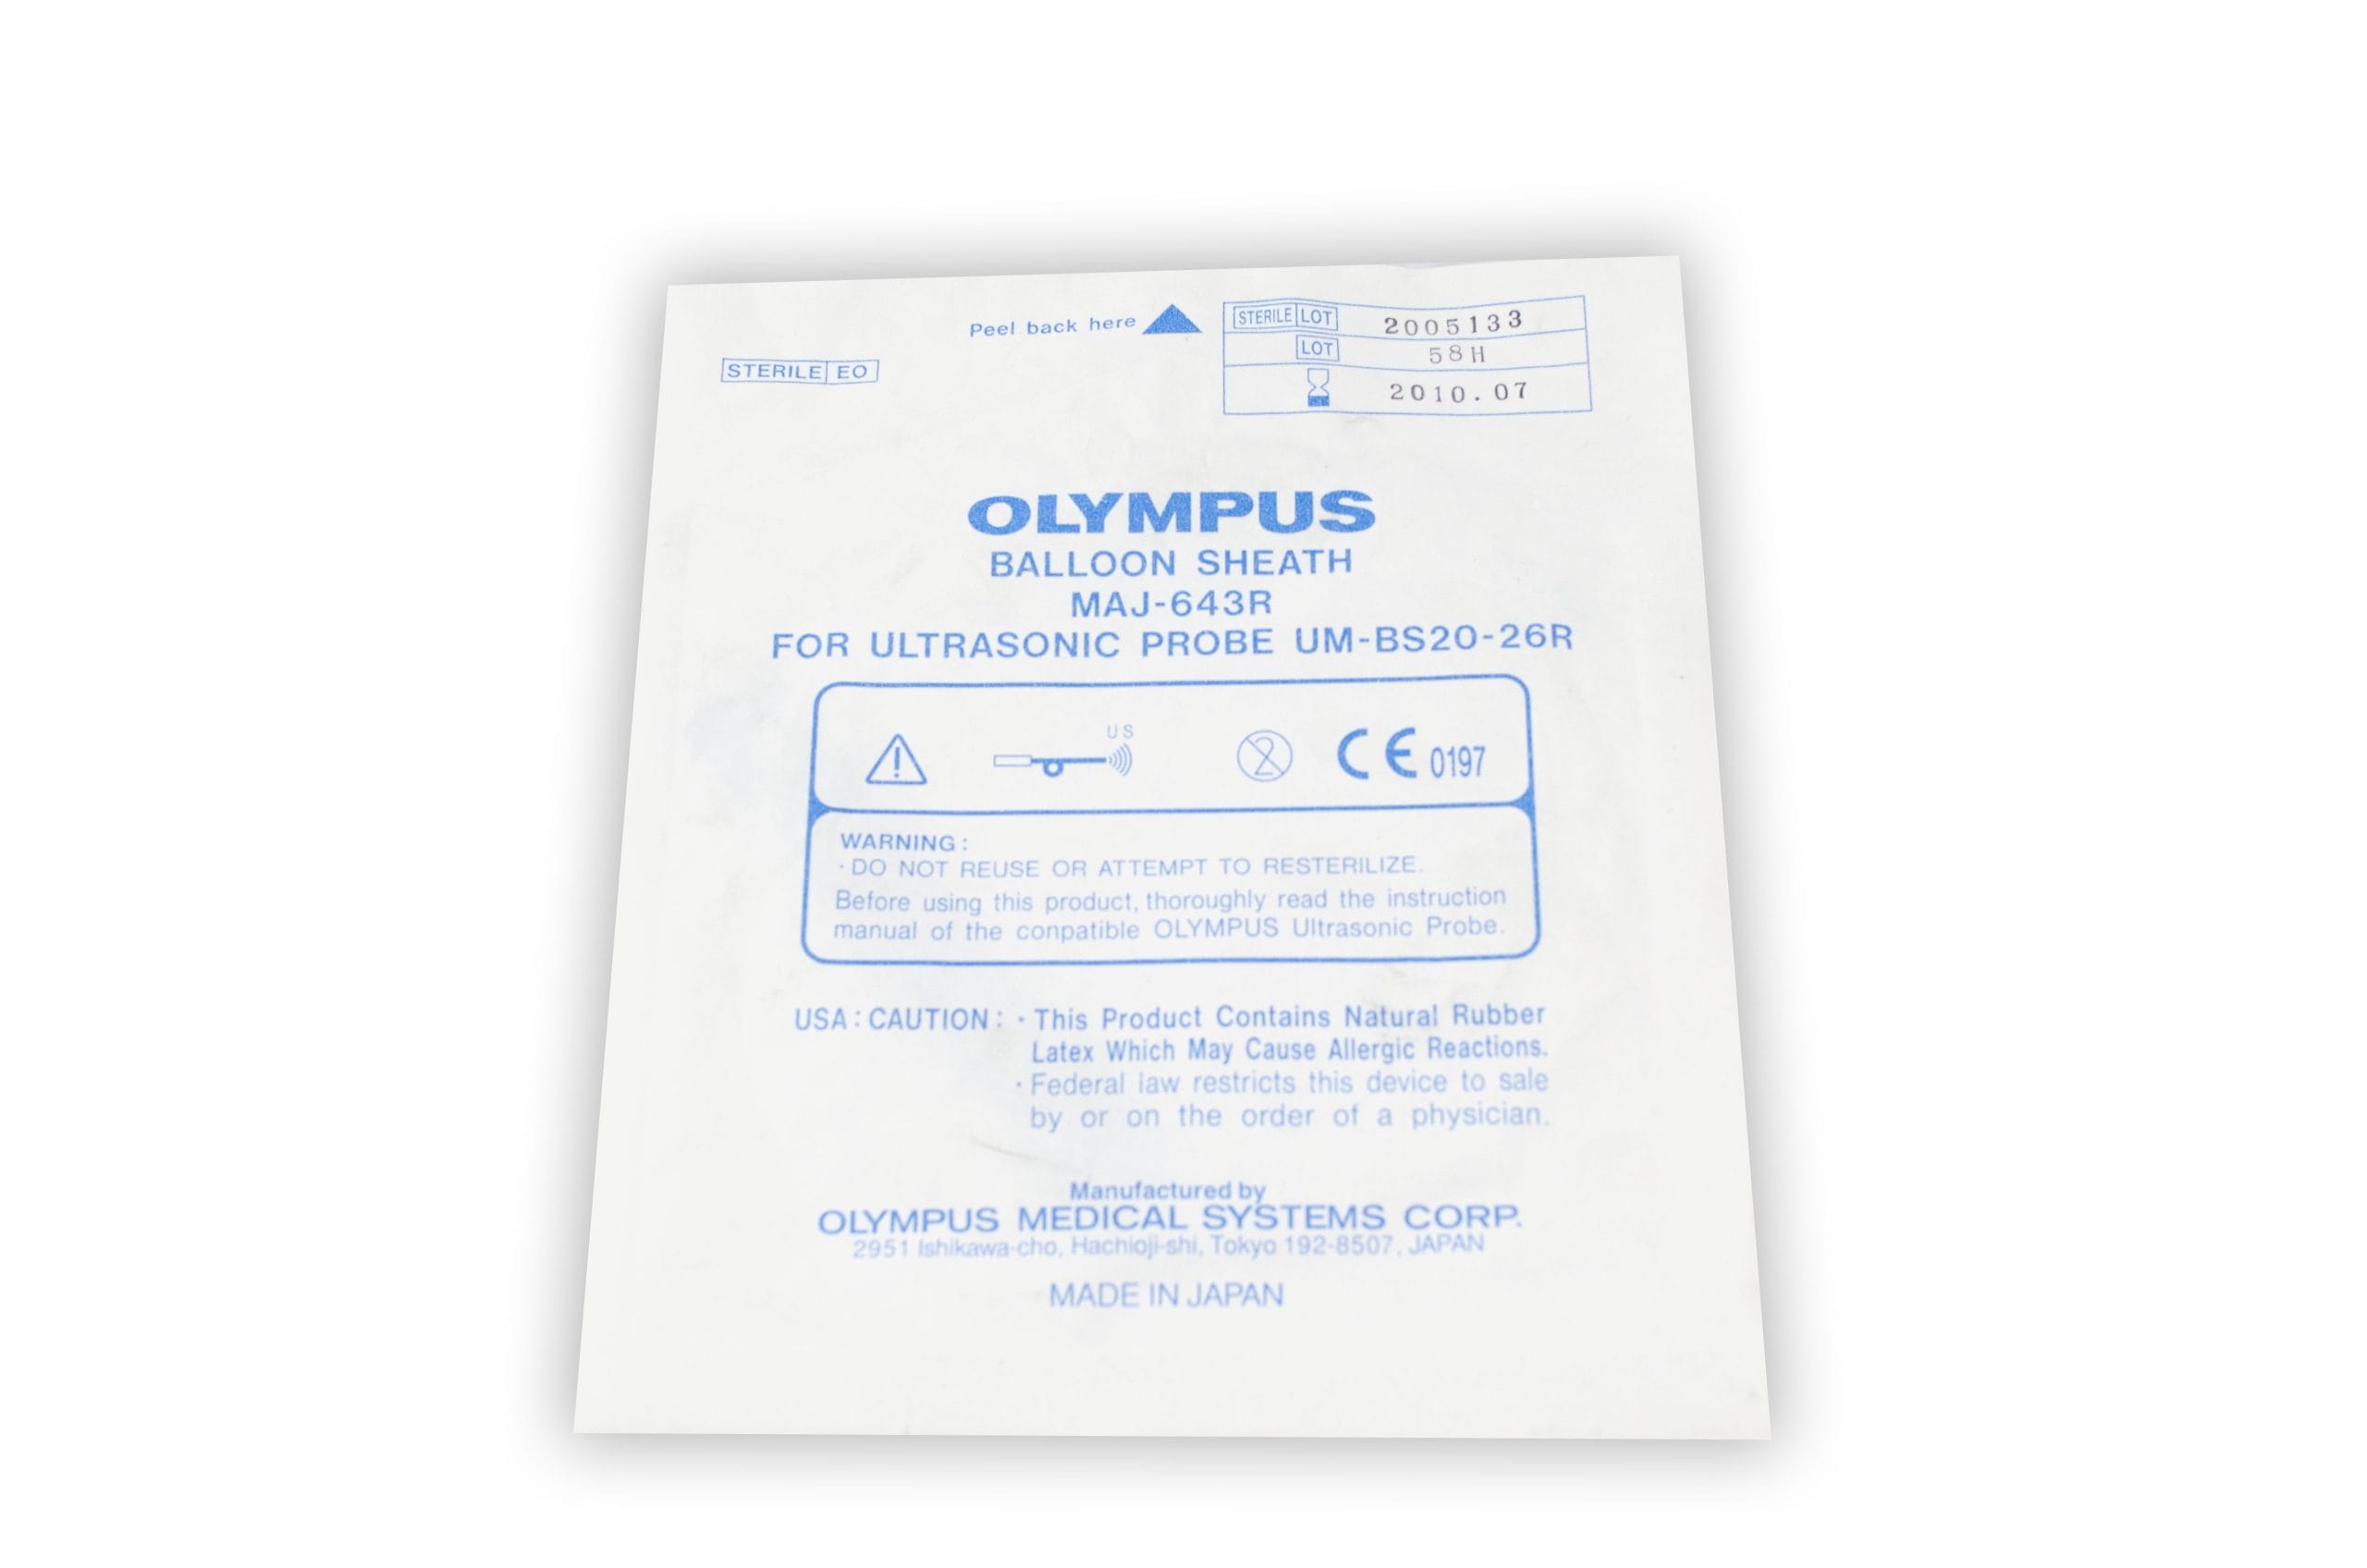 [Out-of-Date] Olympus Disposable Accessory - MAJ-643R